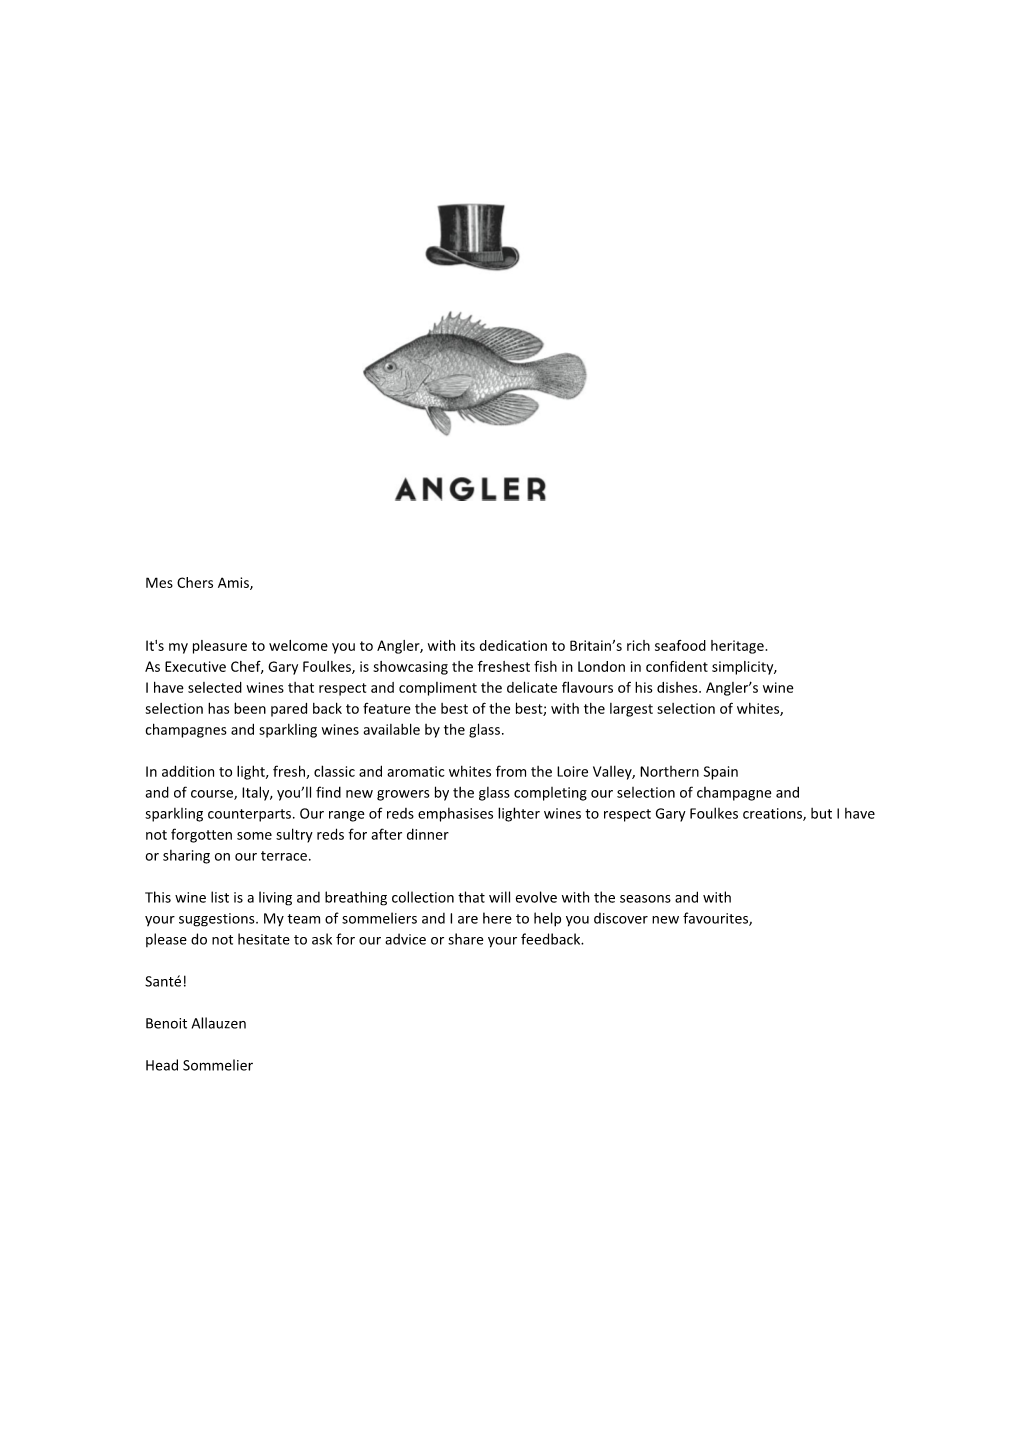 Mes Chers Amis, It's My Pleasure to Welcome You to Angler, with Its